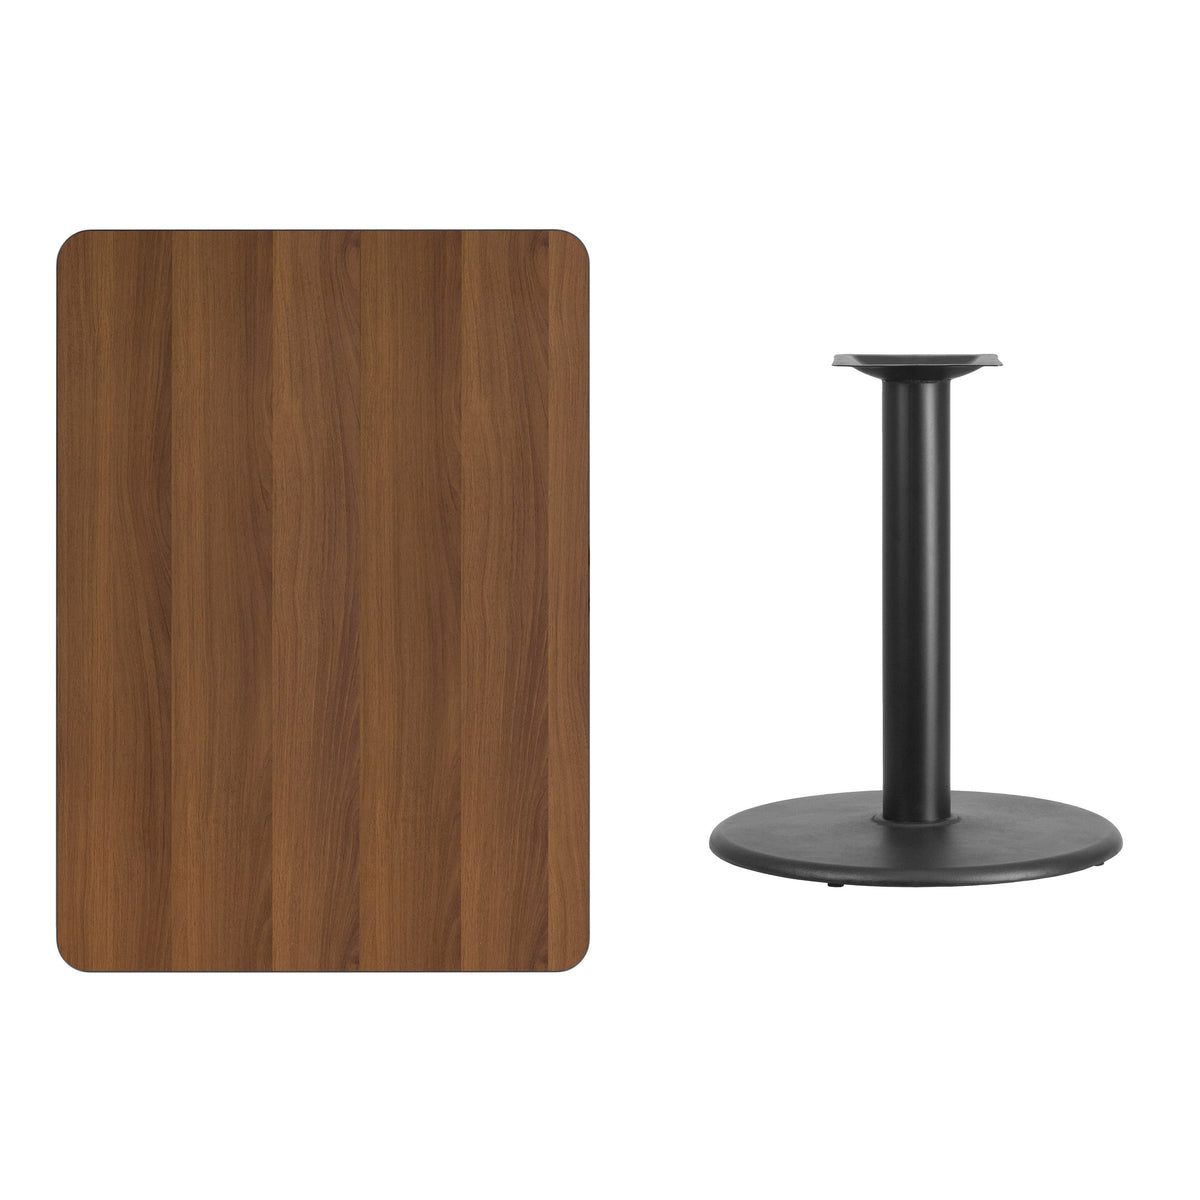 Walnut |#| 30inch x 42inch Rectangular Walnut Laminate Table Top & 24inch Round Table Height Base